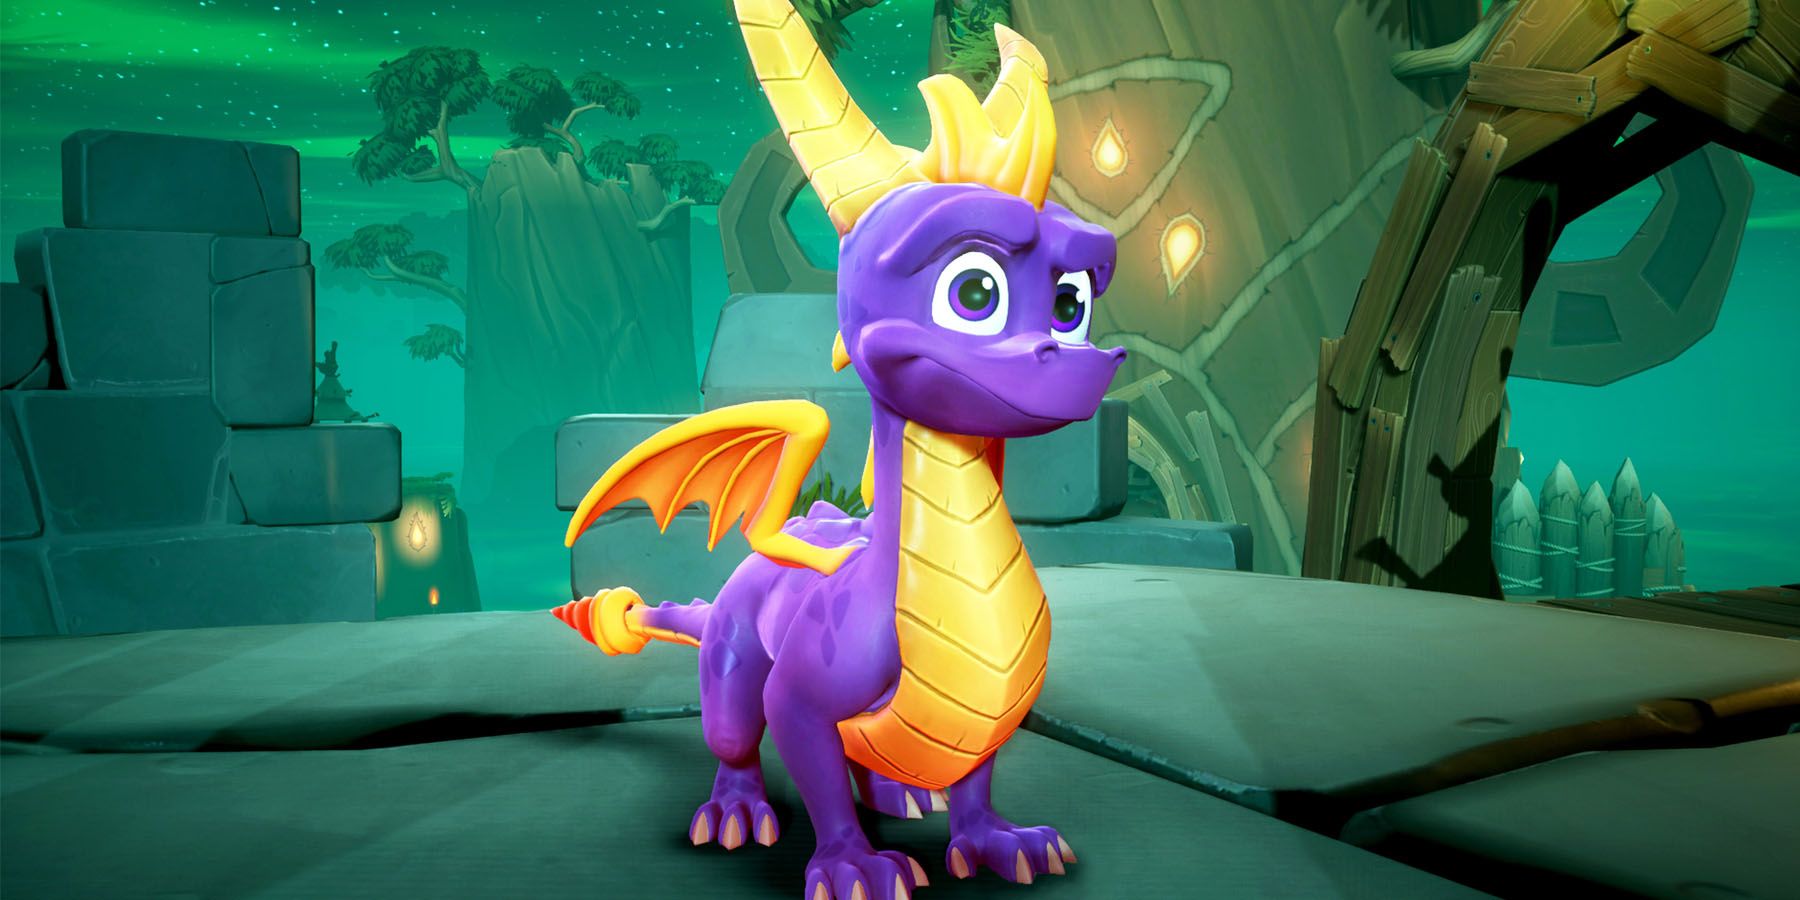 A screenshot of Spyro the Dragon standing in a green tinted castle level in the Reignited Trilogy.